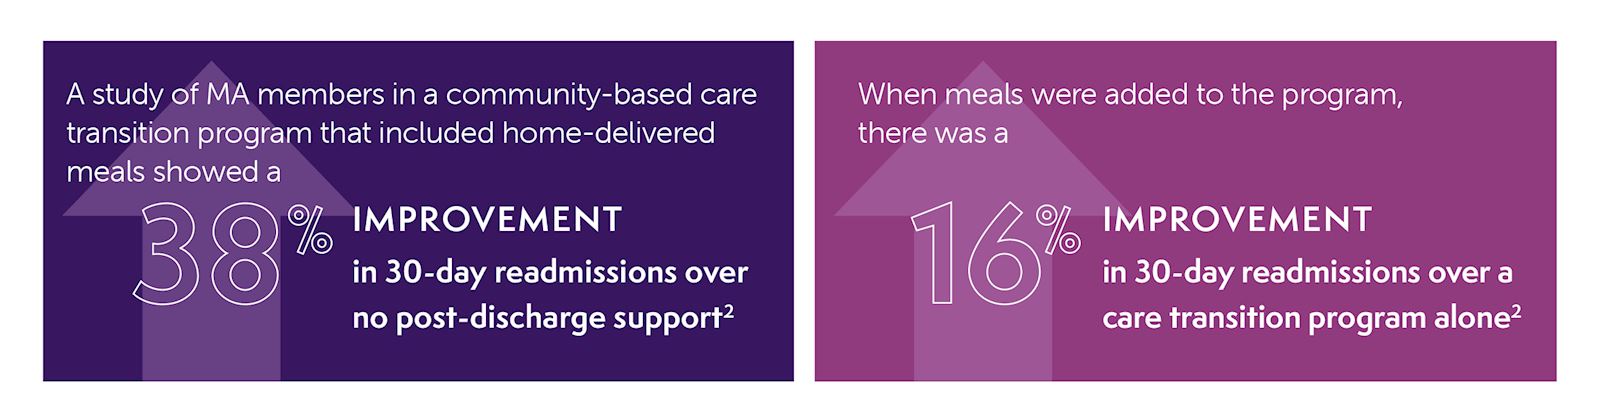 38% improvement in 30 day readmissions over no post-discharge support